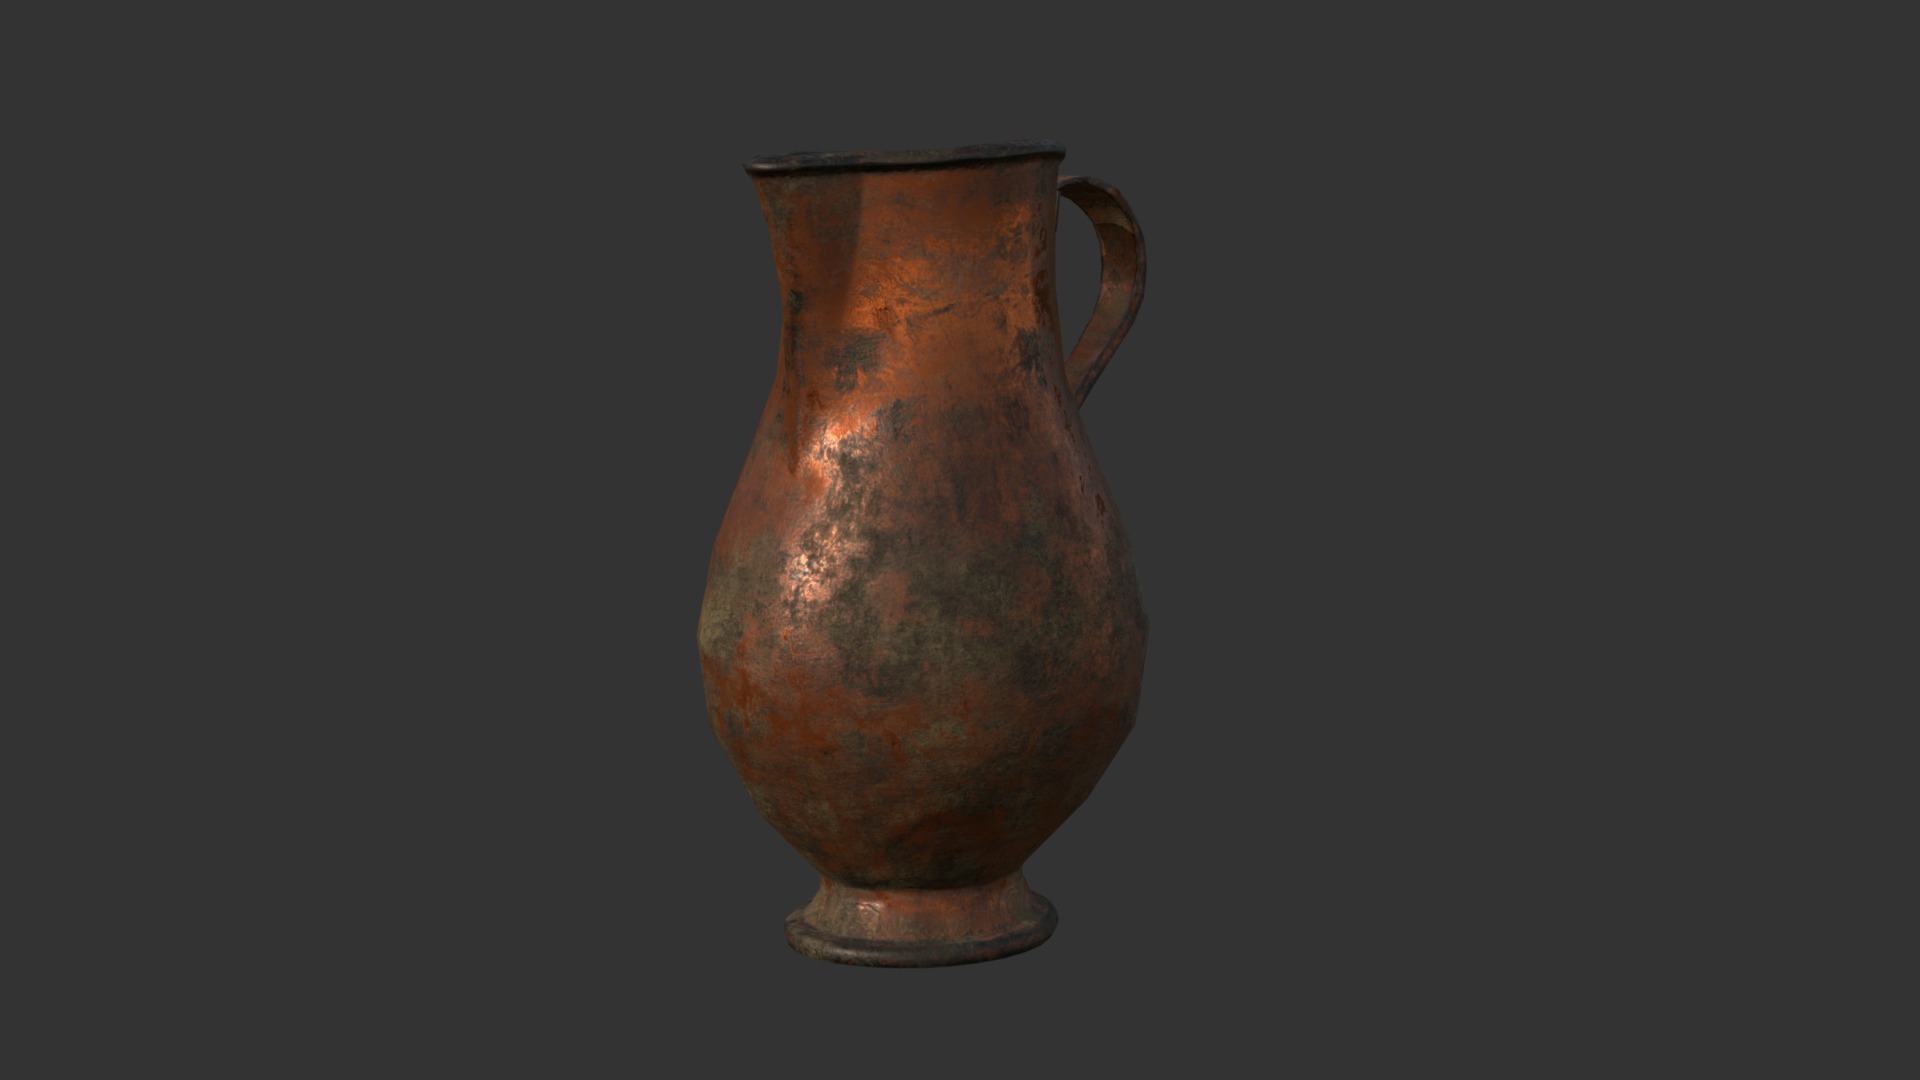 3D model old copper jug (старый медный кувшин) - This is a 3D model of the old copper jug (старый медный кувшин). The 3D model is about a brown vase with a handle.